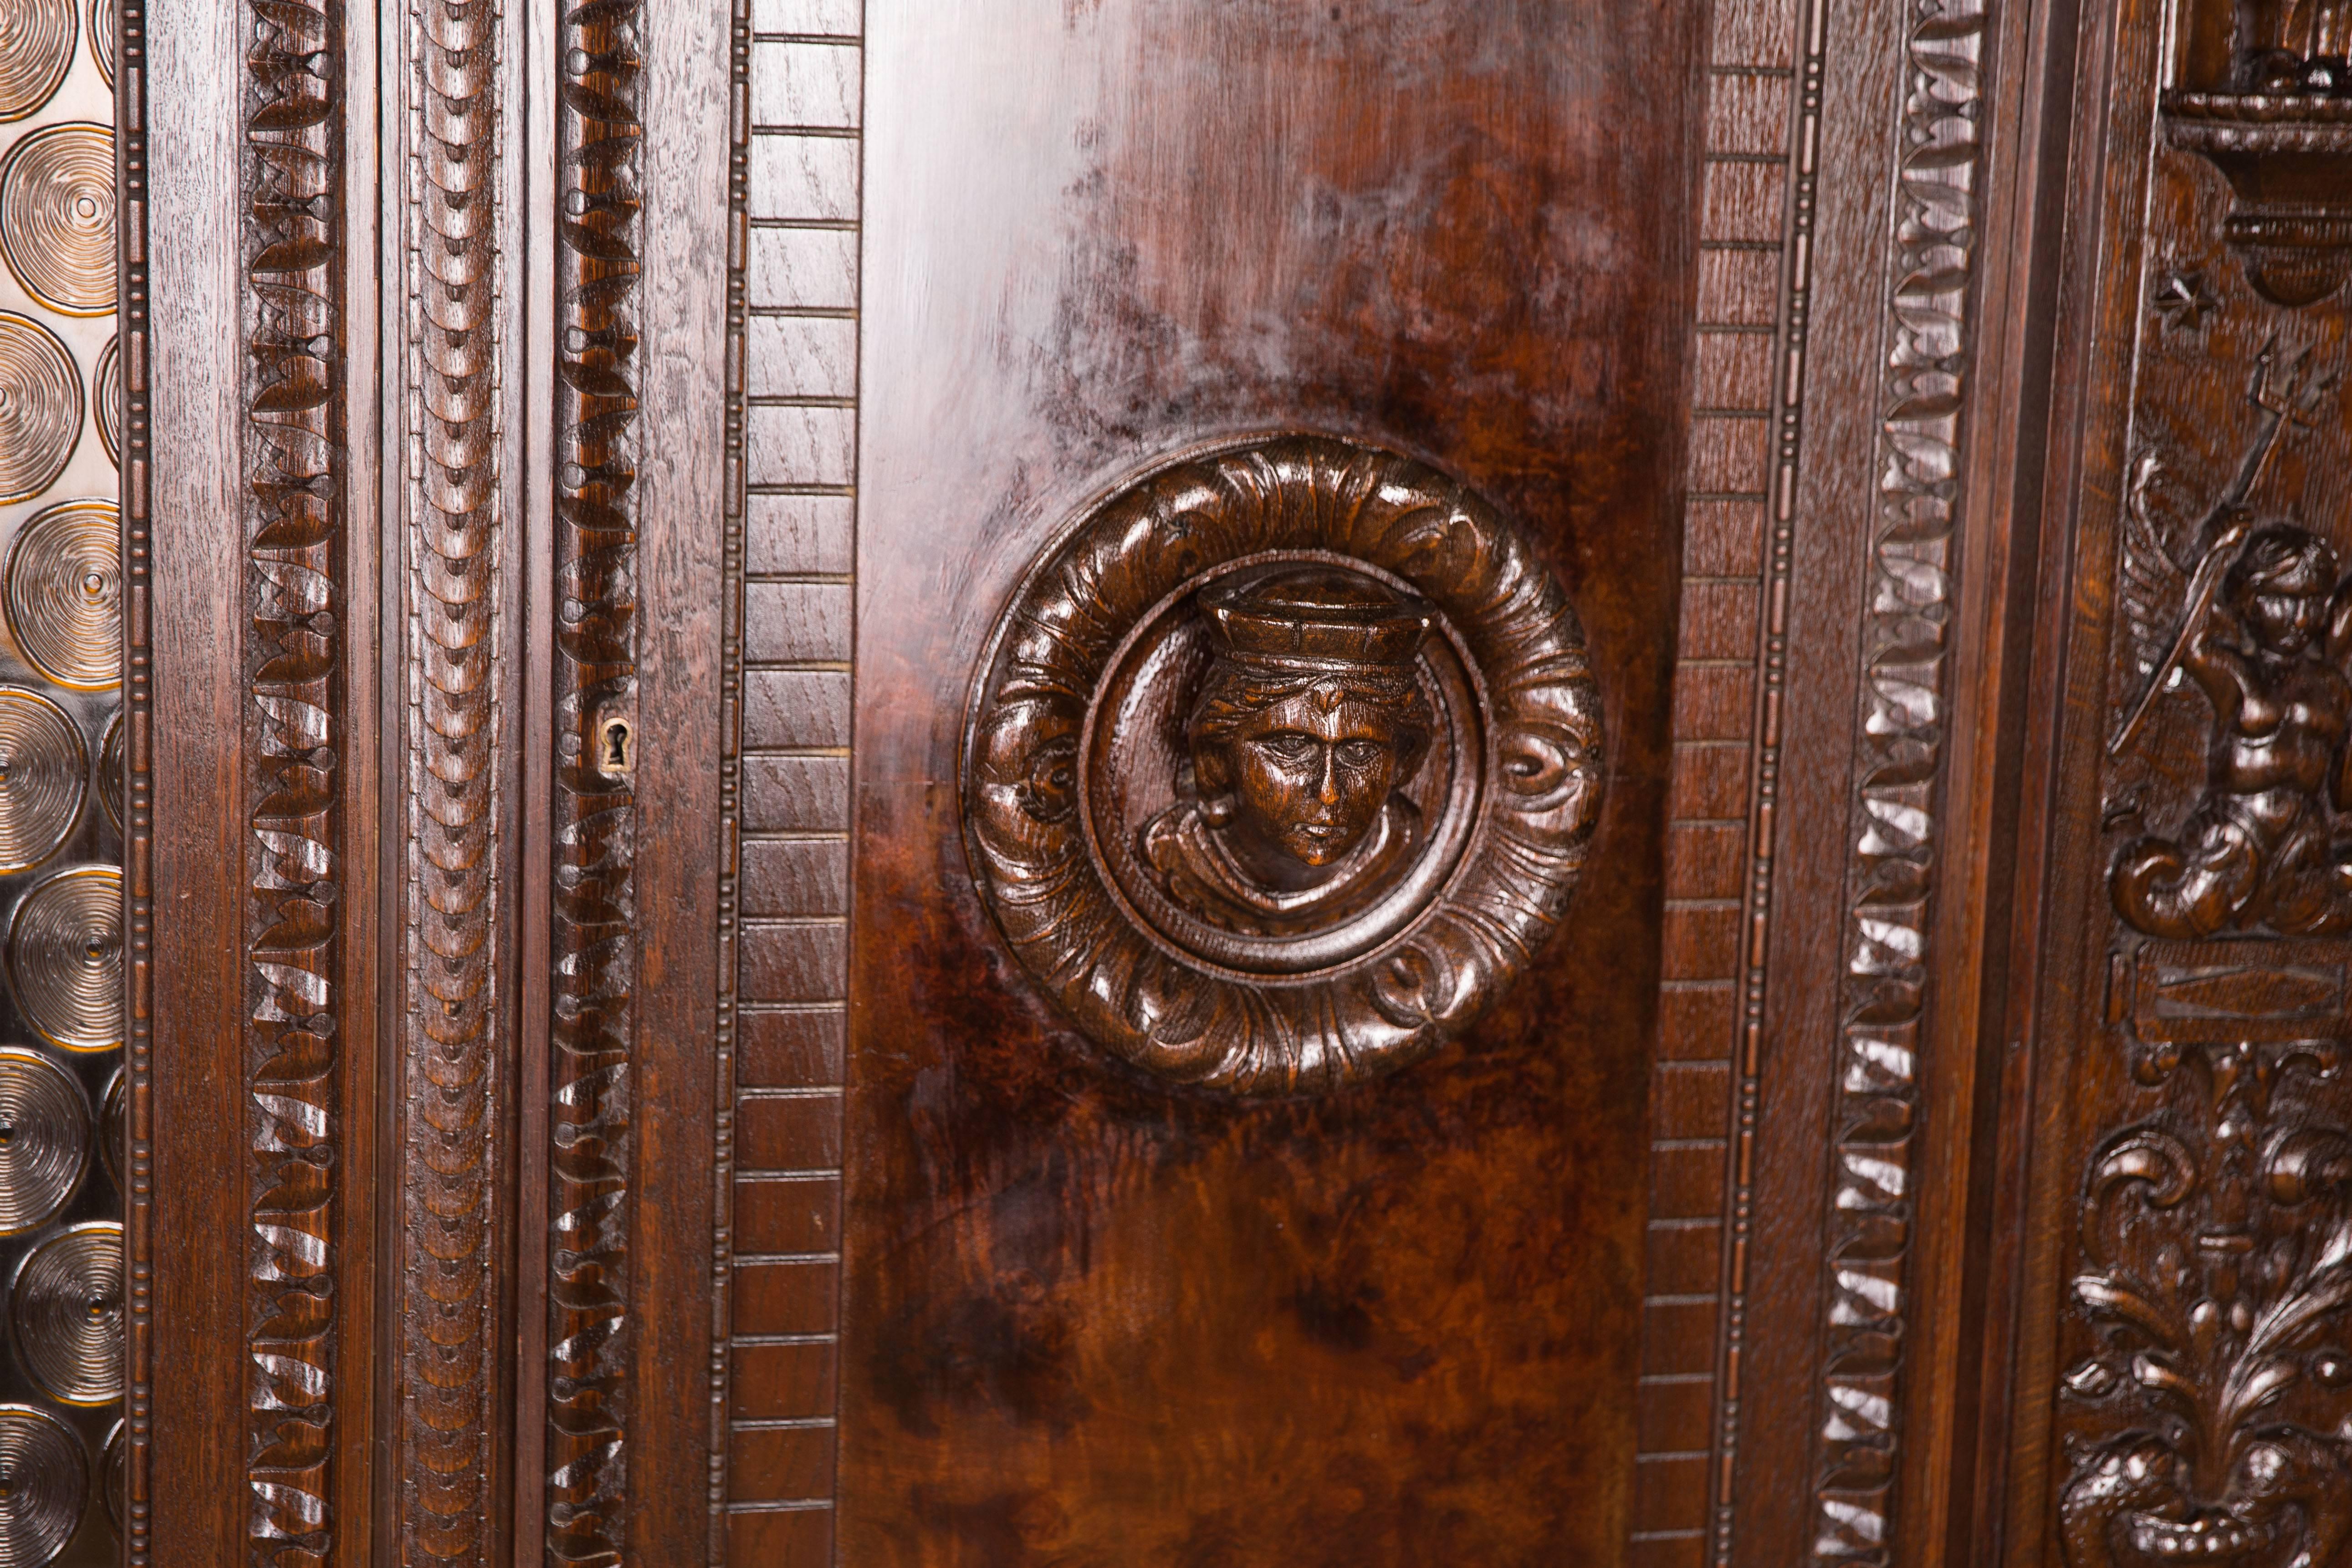 Walnut root on solid wood. Profile-framed frame base on printed pawprints. High-right, architecturally articulated body. Two doors, two glass doors in the middle. On the sides of the corpus are carvings and carved figures. Highly profiled